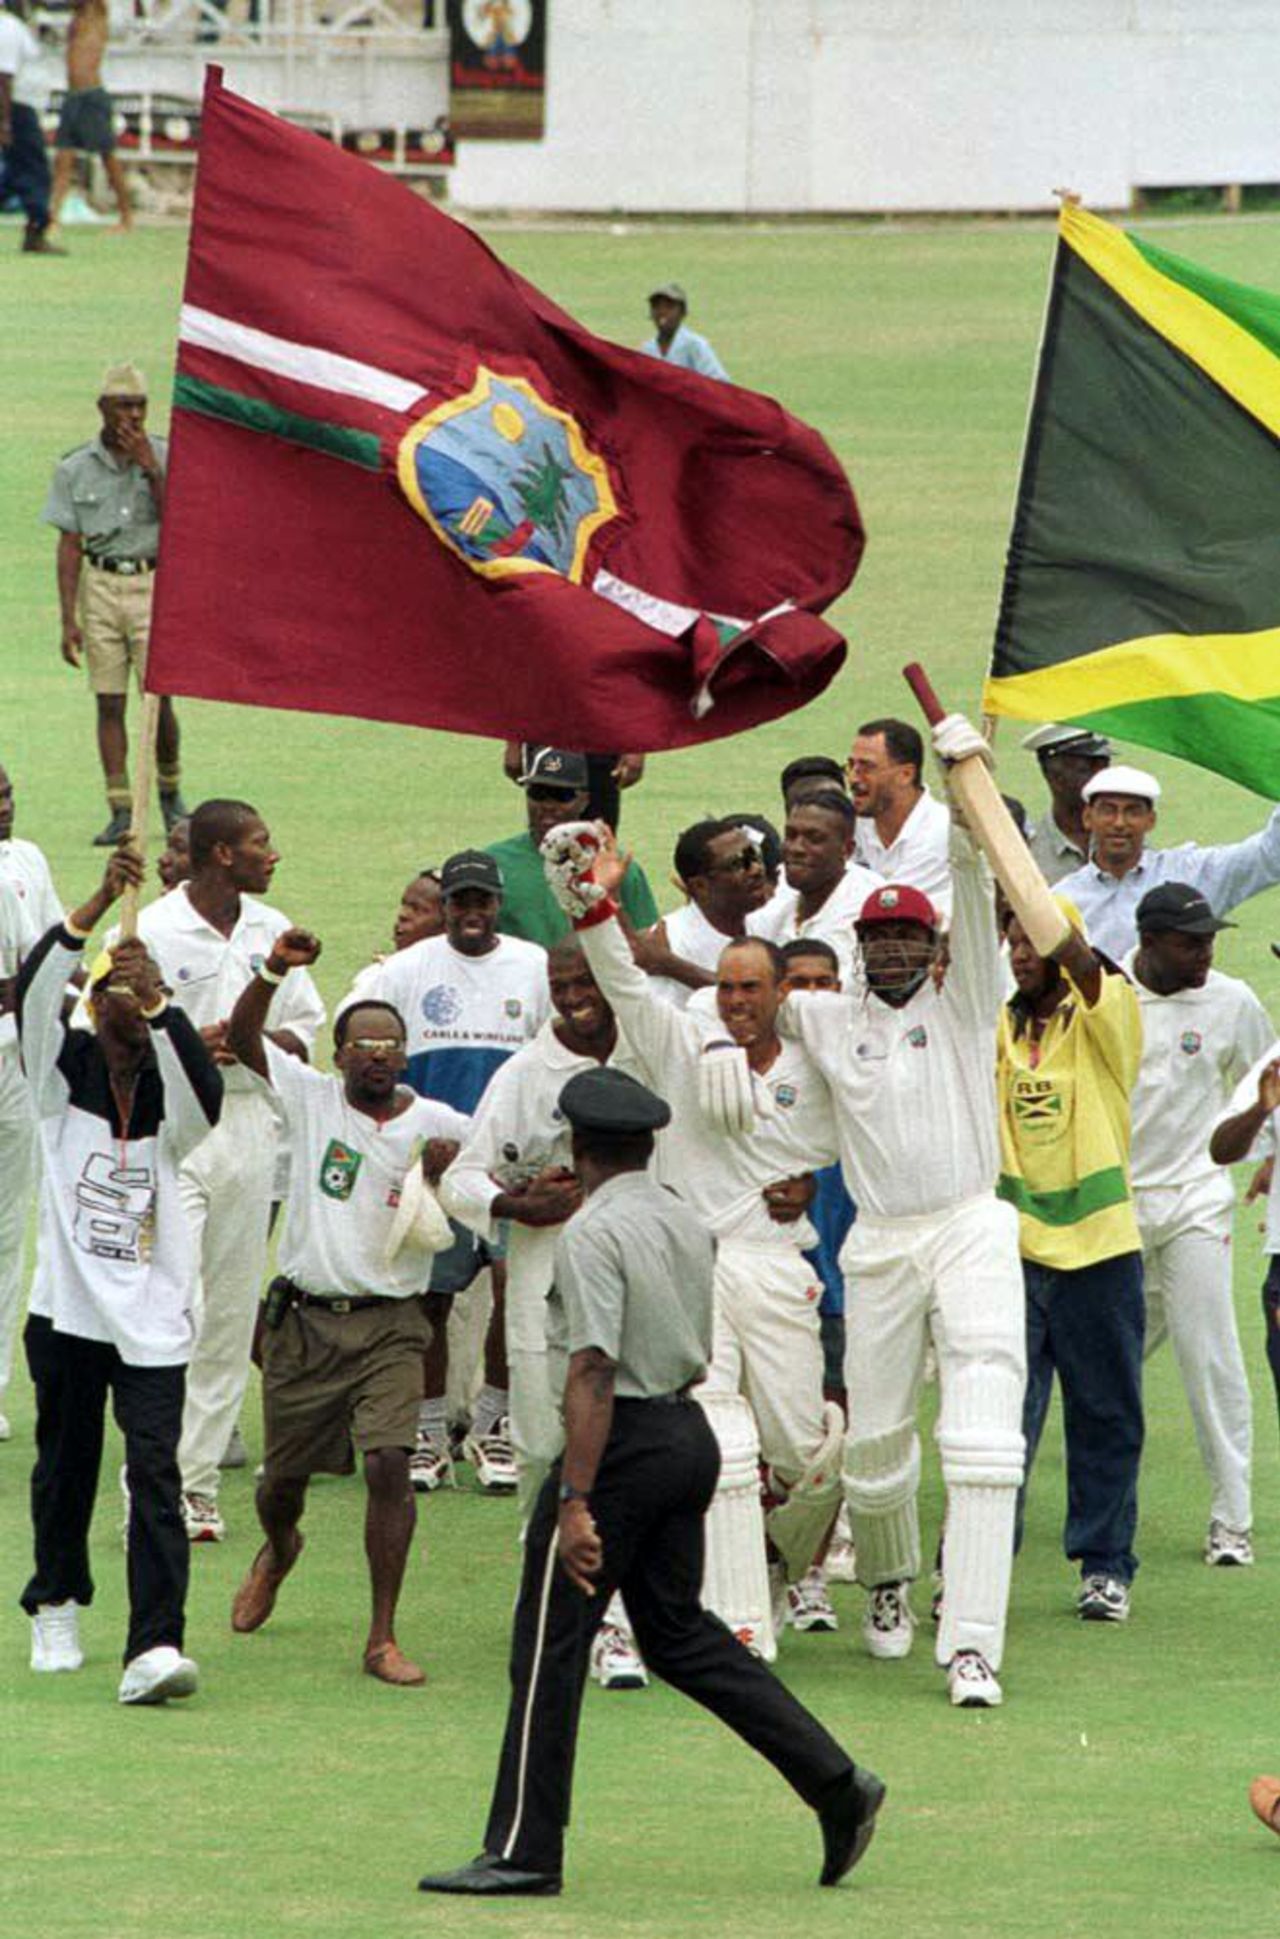 West Indies captain Jimmy Adams and Courtney Walsh run off the field after beating Pakistan by one wicket on the fifth day of the third and final Test match 29 May 2000 at the Antigua. Pakistan in West Indies 1999/00, 3rd Test, West Indies v Pakistan, Antigua Recreation Ground, St John's, Antigua, (25-29 May 2000) Day 5